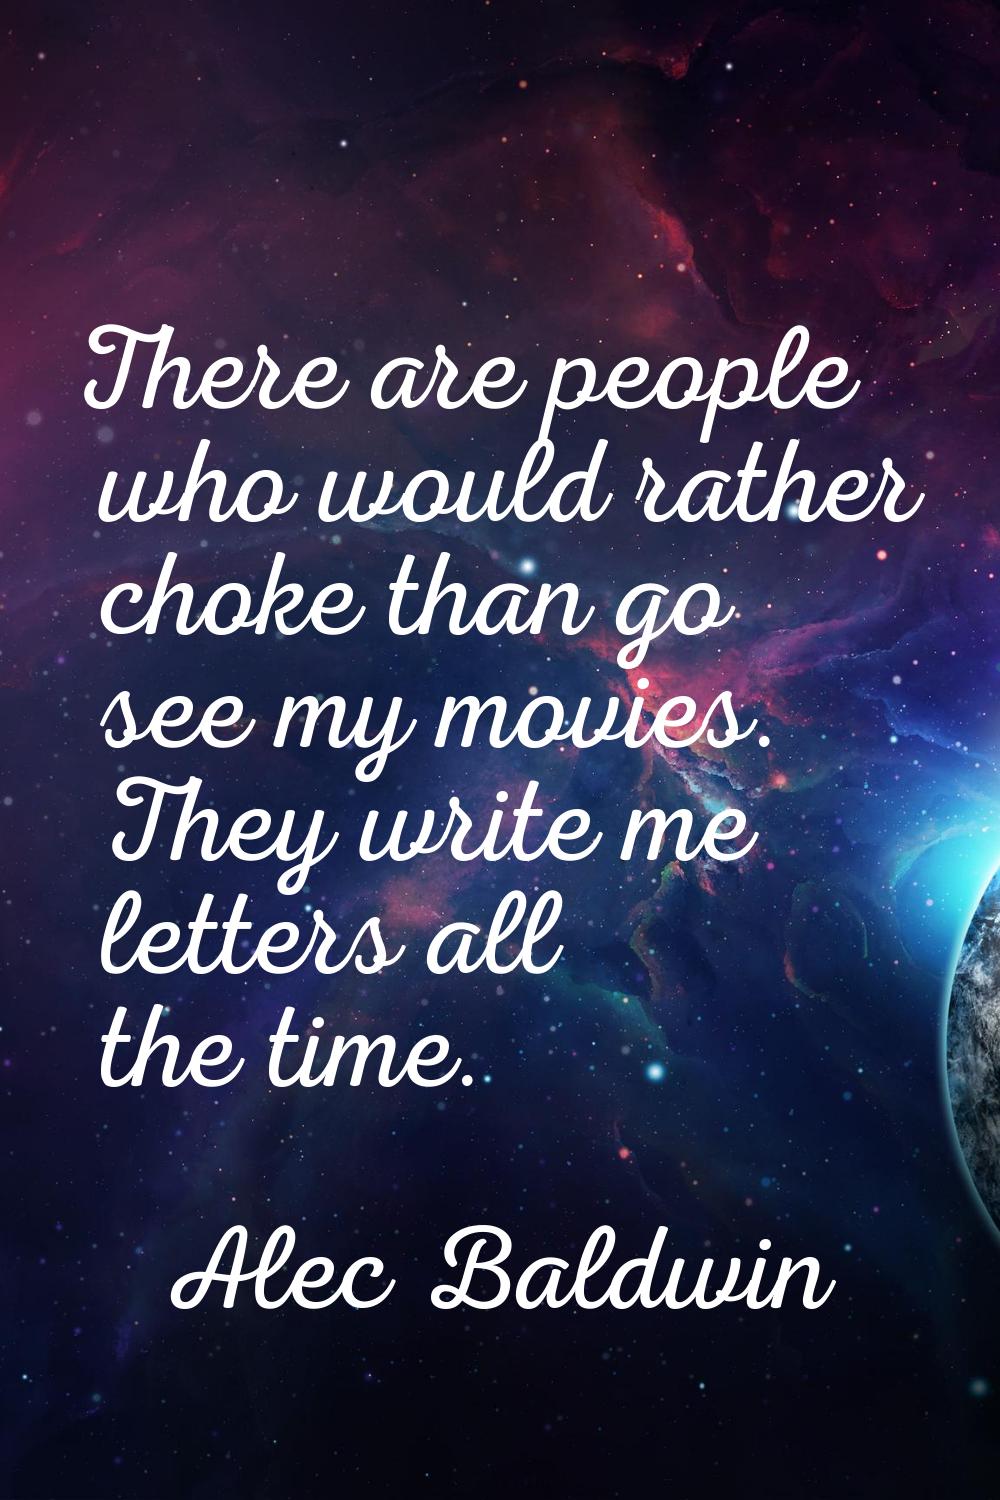 There are people who would rather choke than go see my movies. They write me letters all the time.